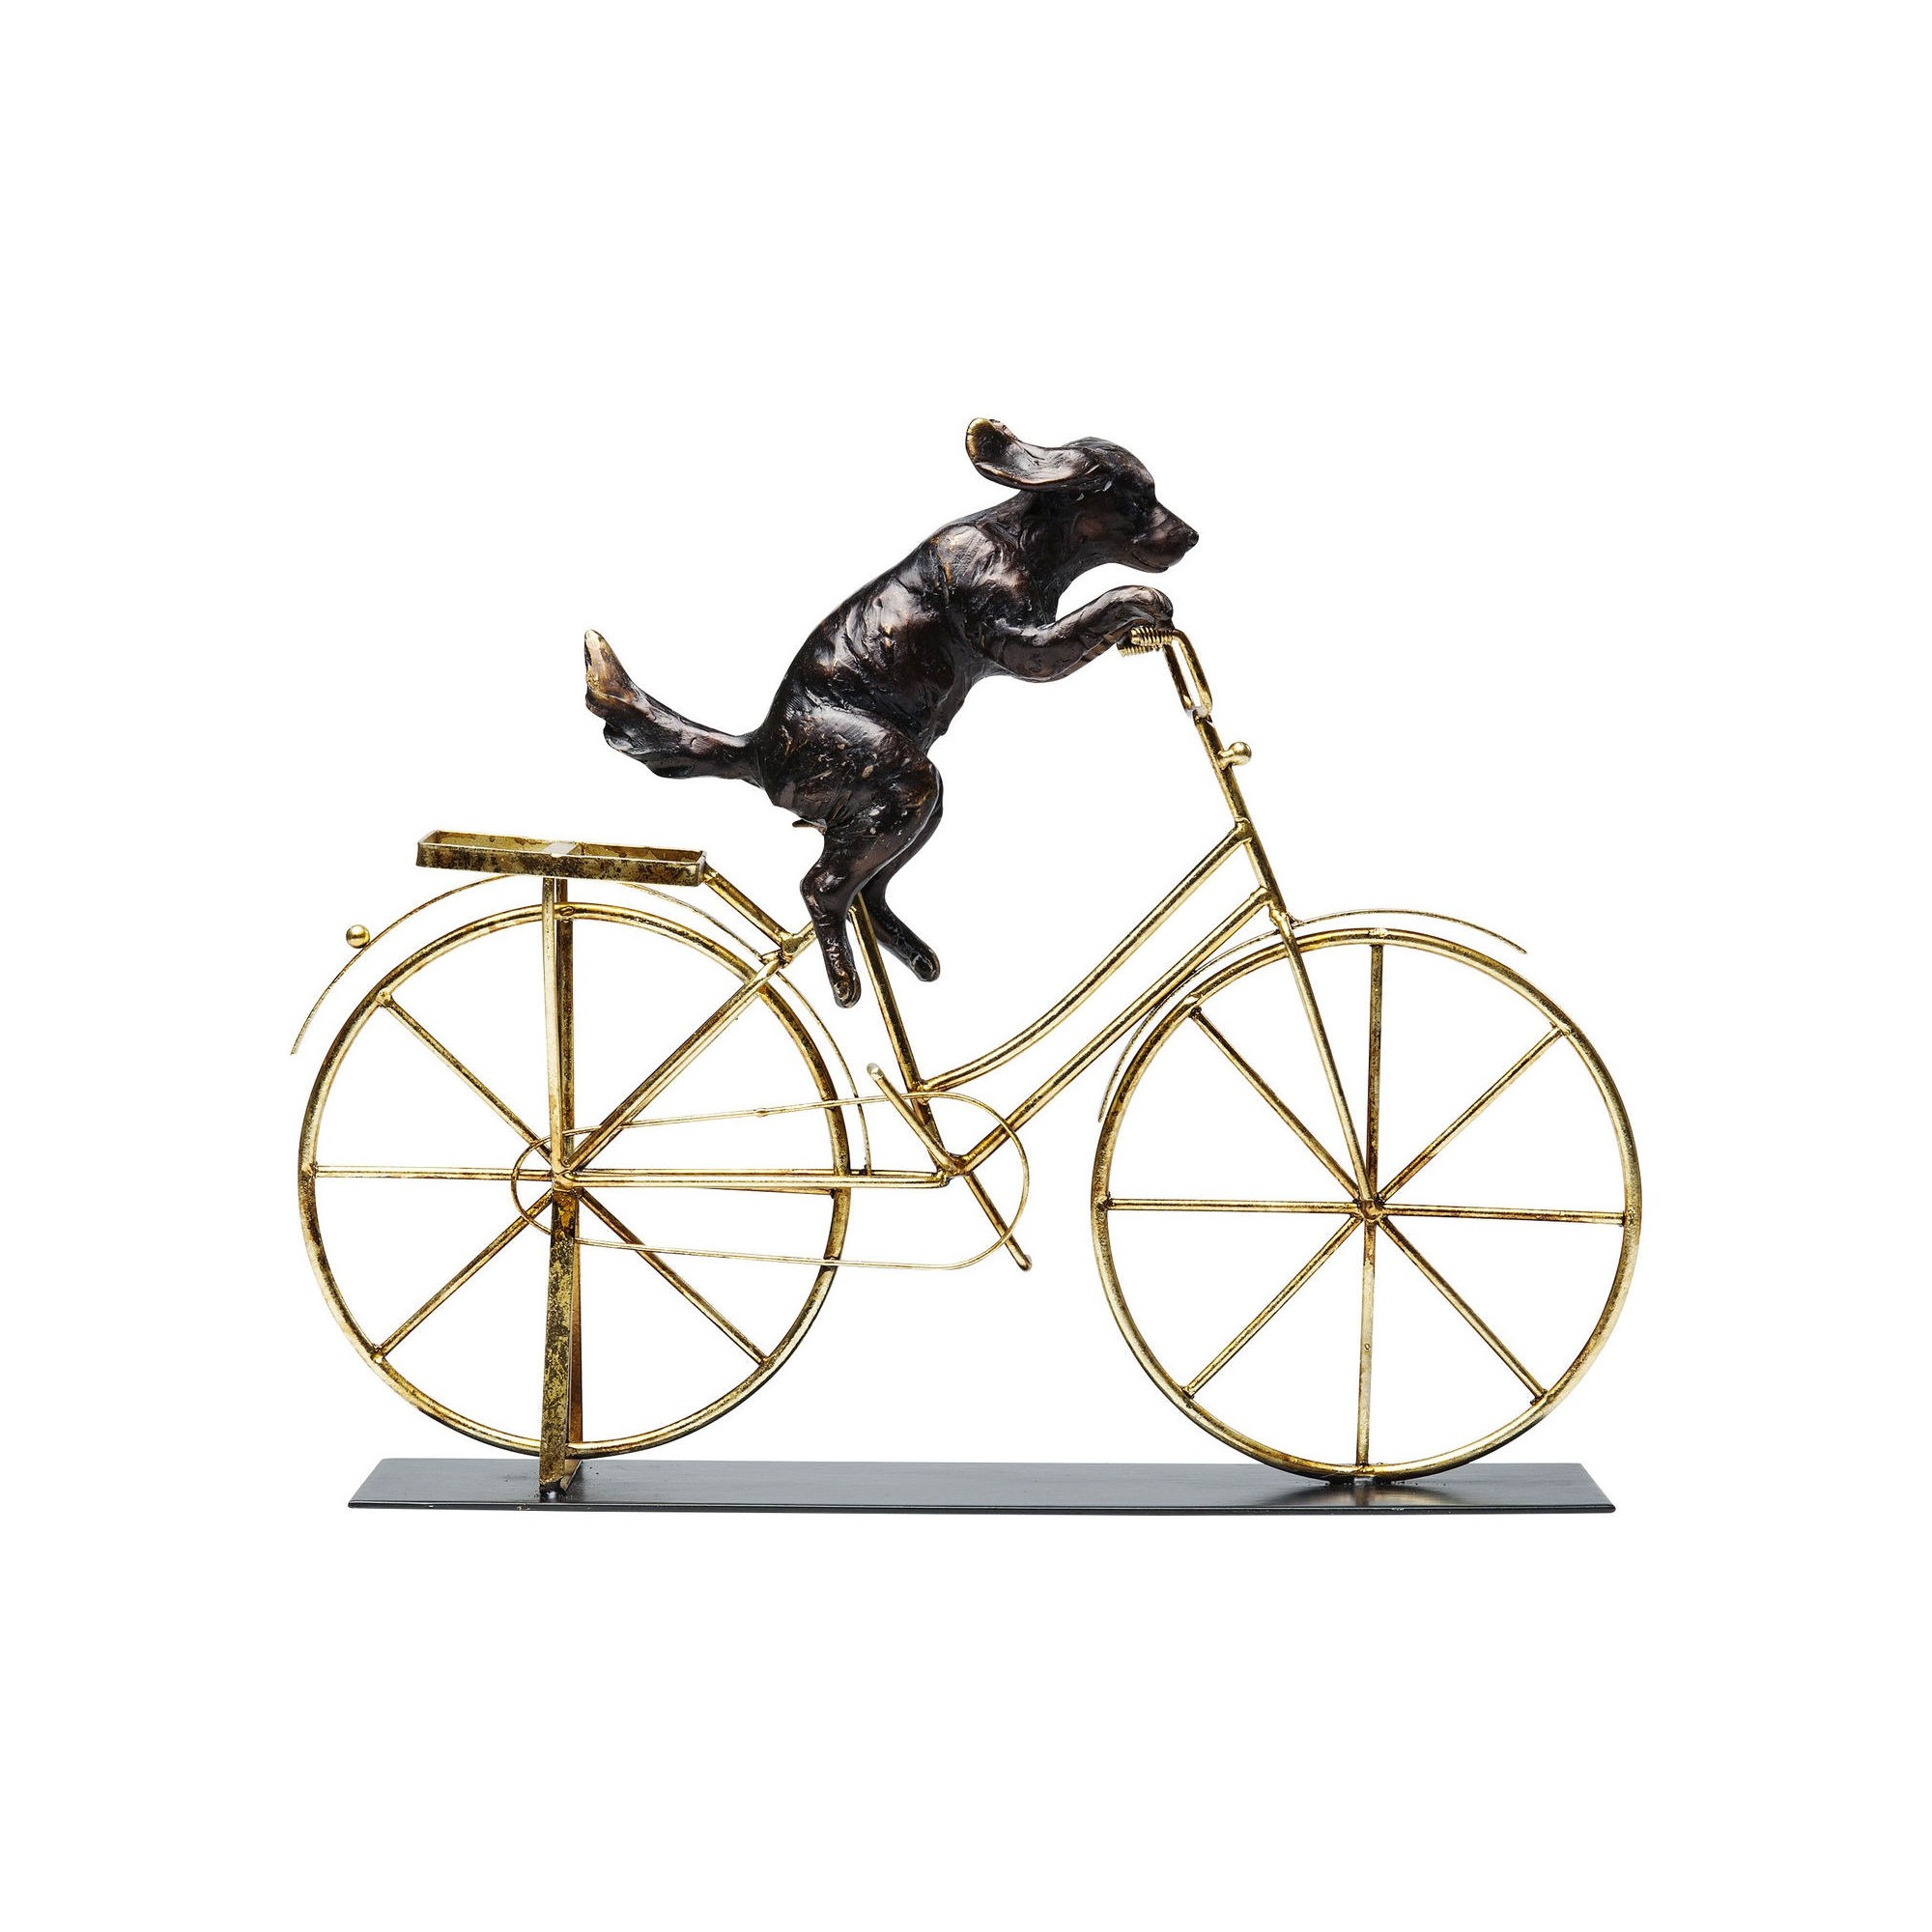 Deco Object Dog With Bicycle Kare Design